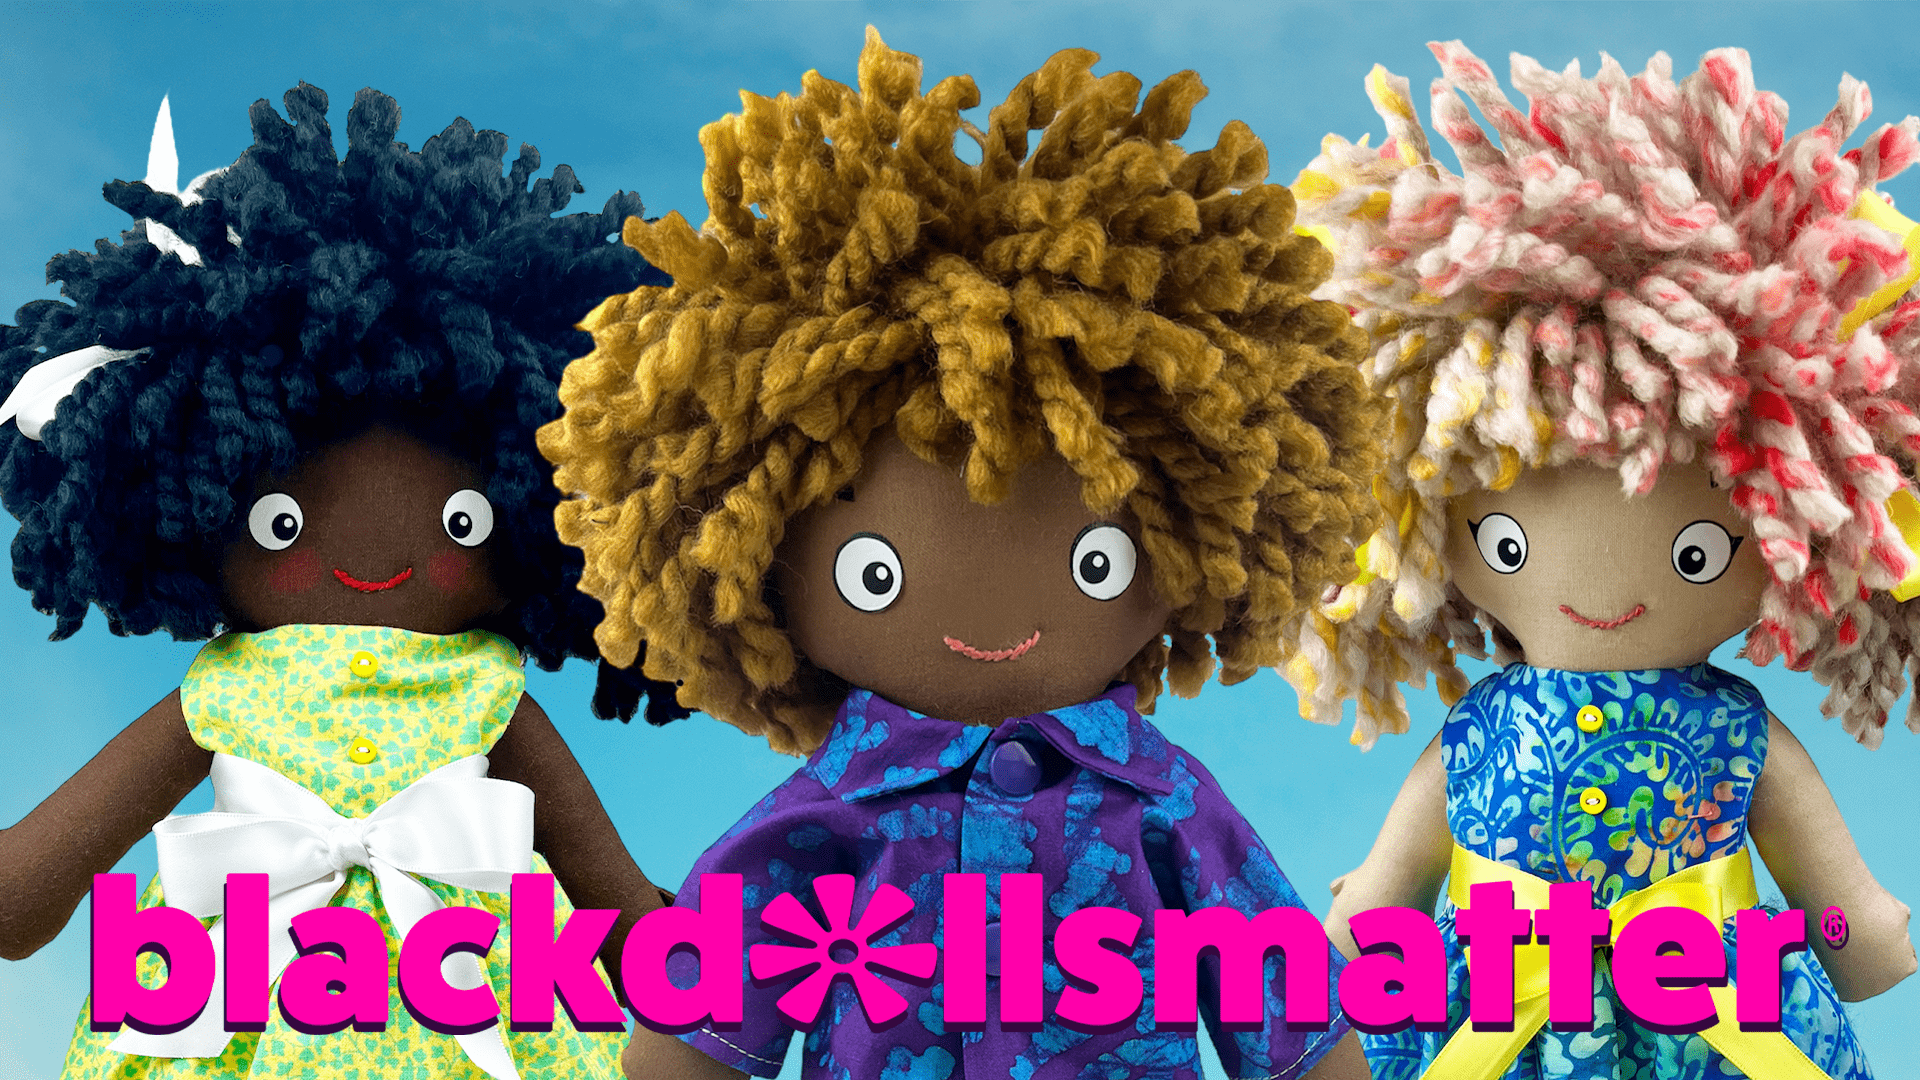 Positively Inclusive Dolls., Welcome Home, BLACK DOLLS MATTER